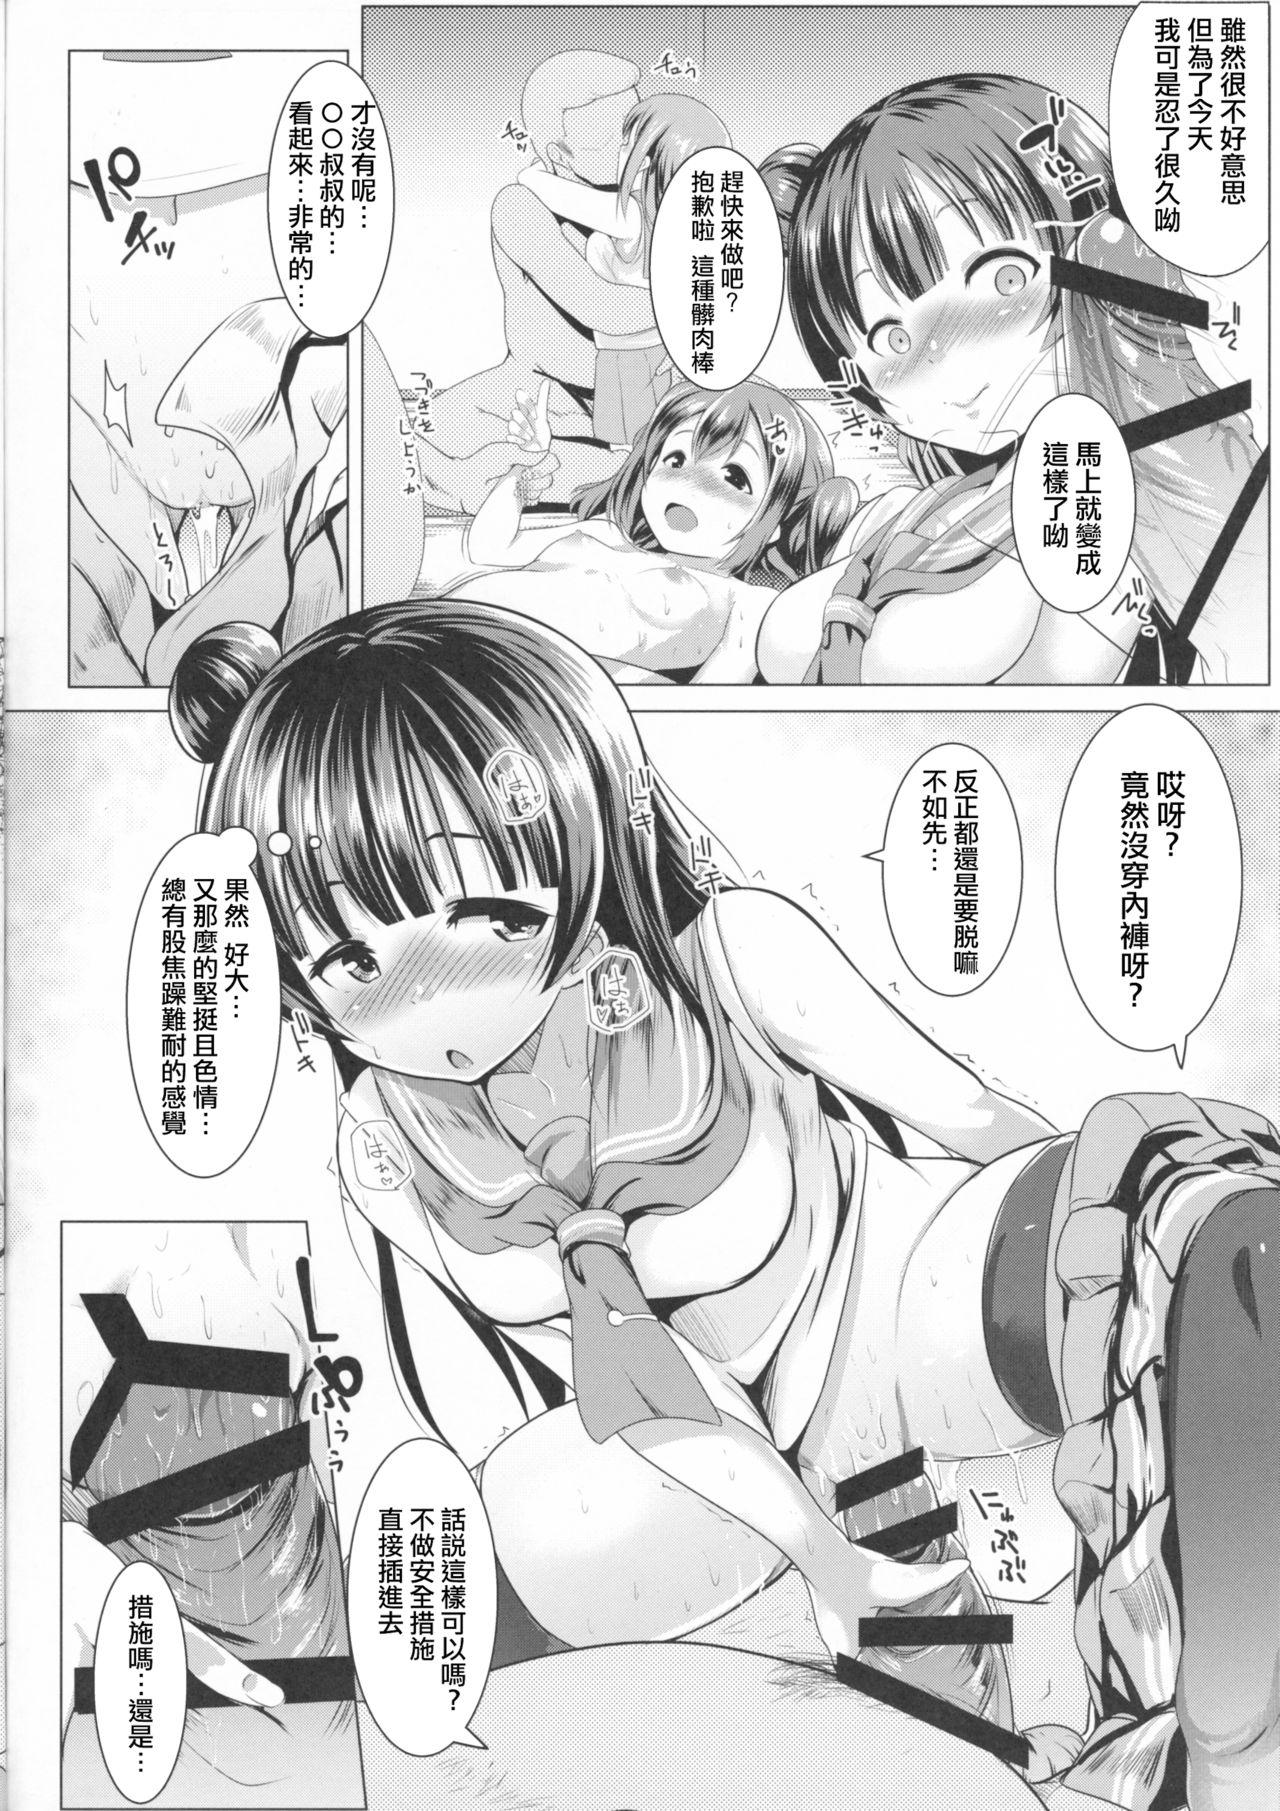 Huge Cock SUMMER PROMISCUITY with Yoshimaruby - Love live sunshine Classy - Page 7